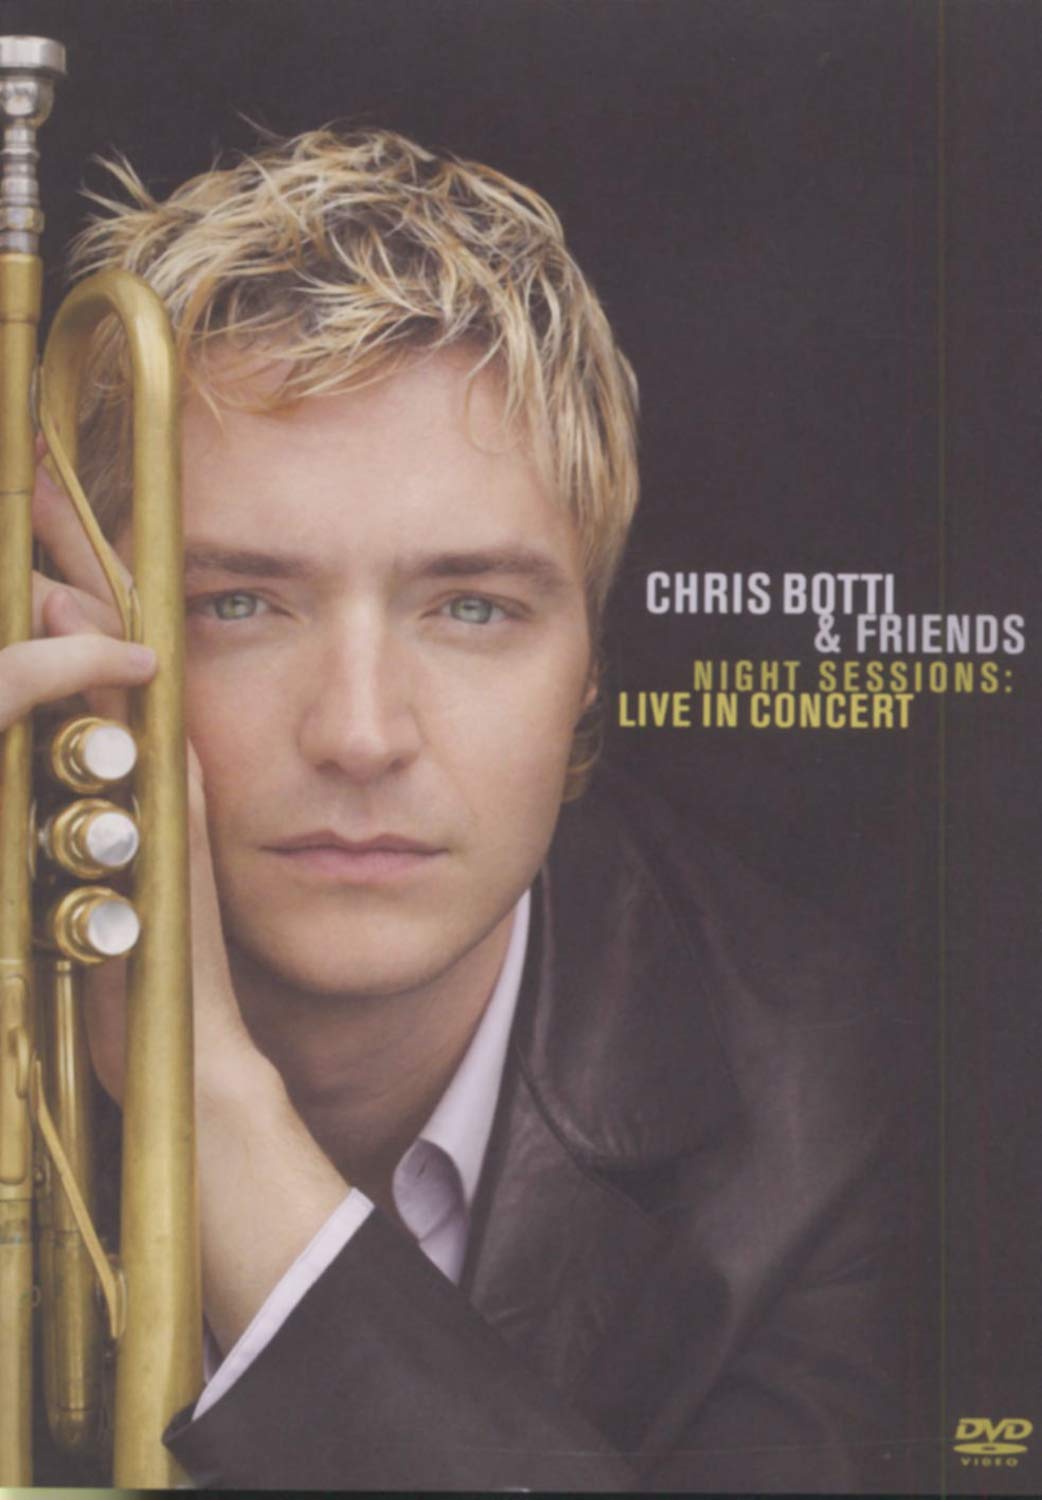 Chris Botti & Friends- Night Sessions: Live In Concert - Darkside Records